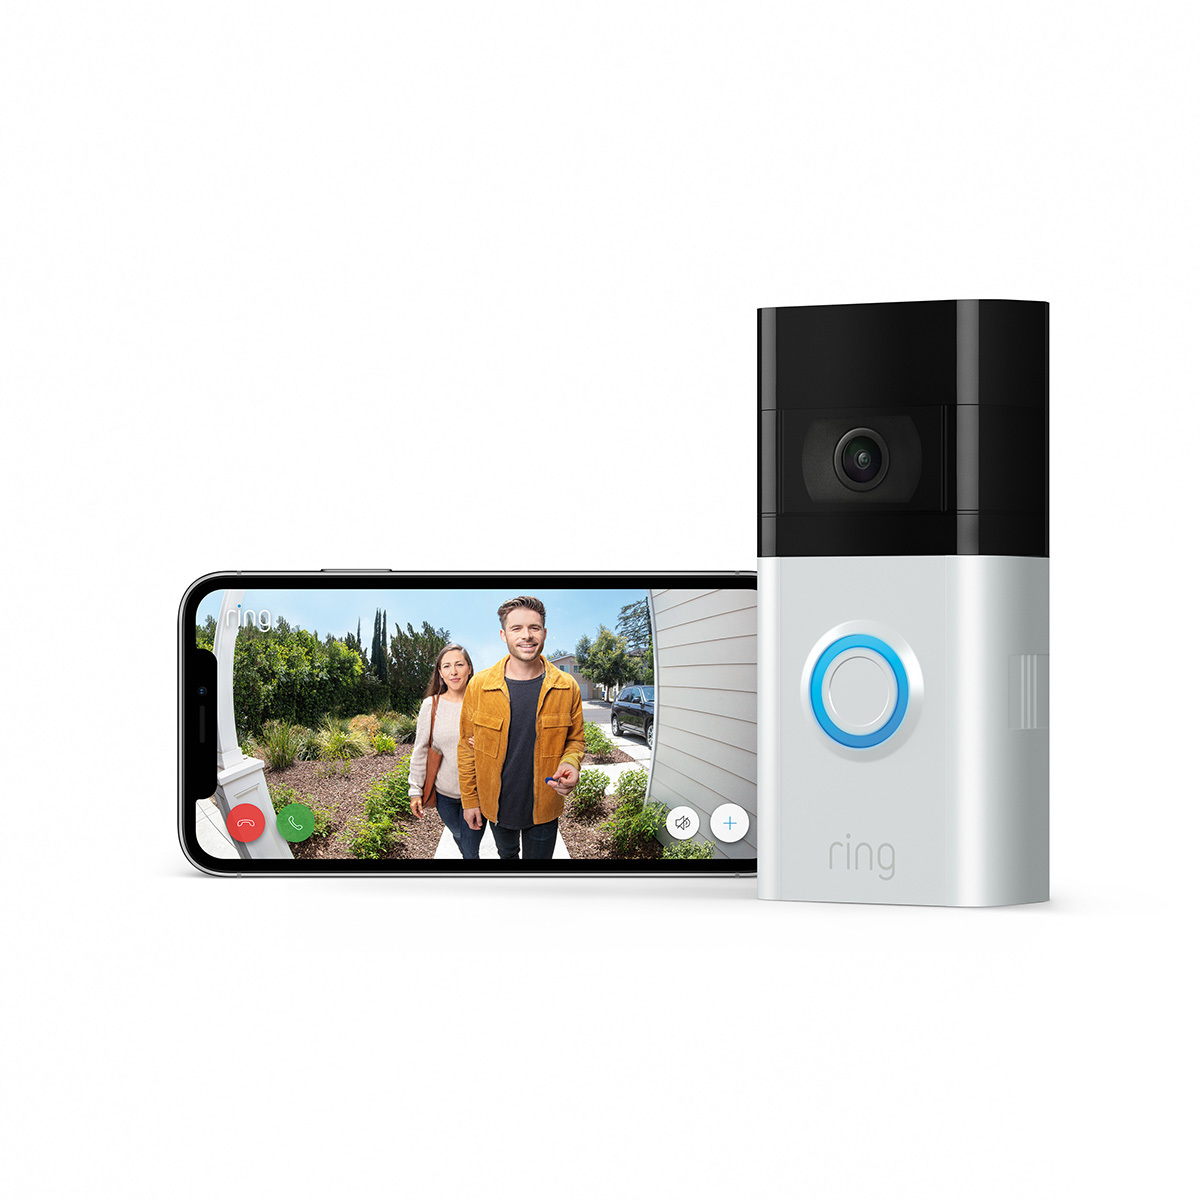 Cut out image of Ring doorbell with smartphone (not included)